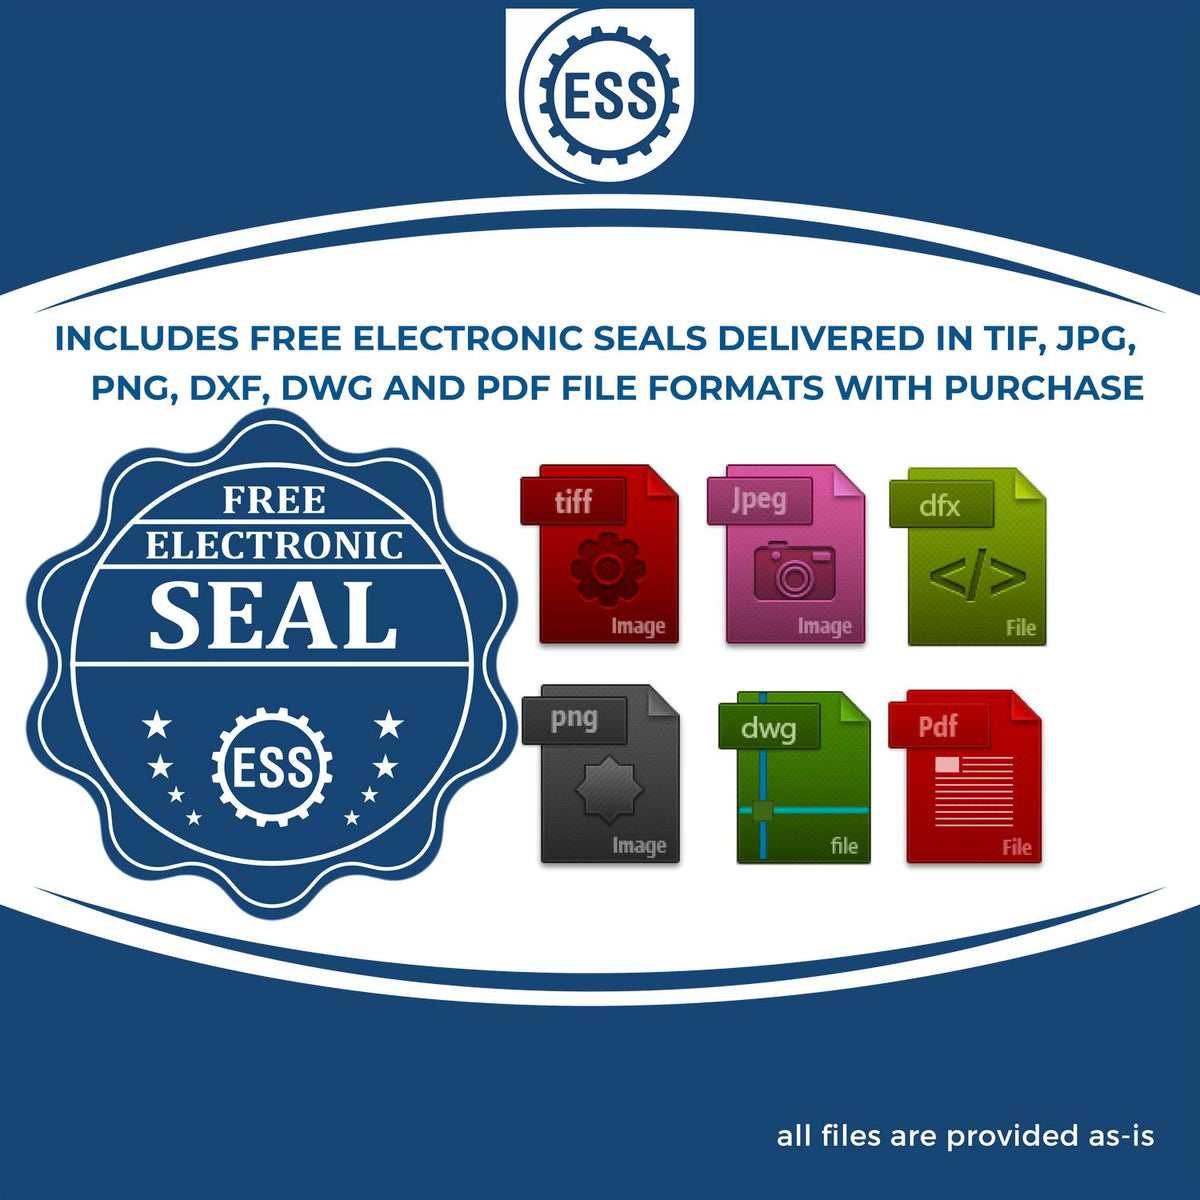 An infographic for the free electronic seal for the Slim Pre-Inked Utah Professional Engineer Seal Stamp illustrating the different file type icons such as DXF, DWG, TIF, JPG and PNG.